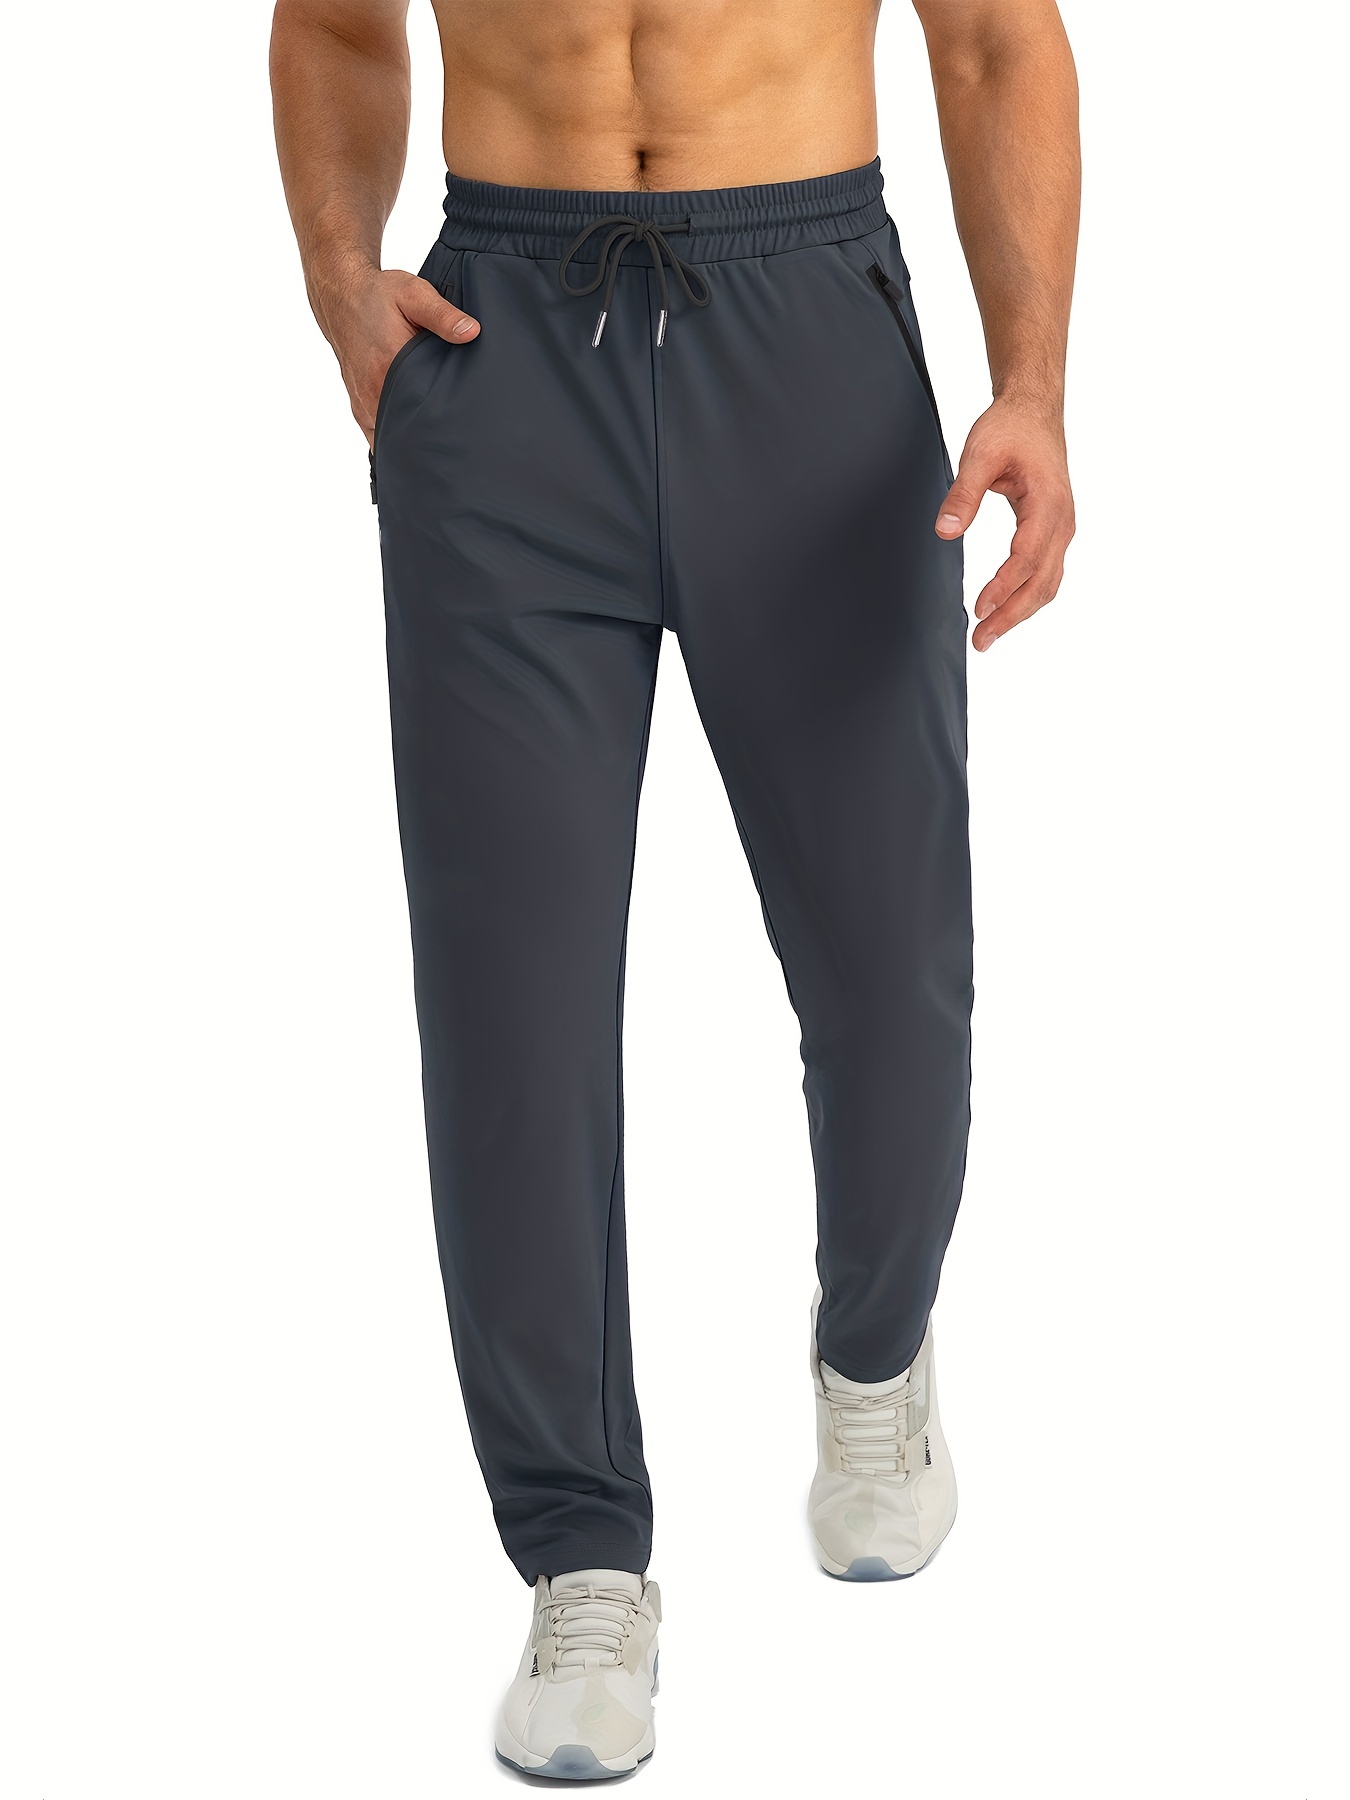 Under Armour draw string joggers in grey